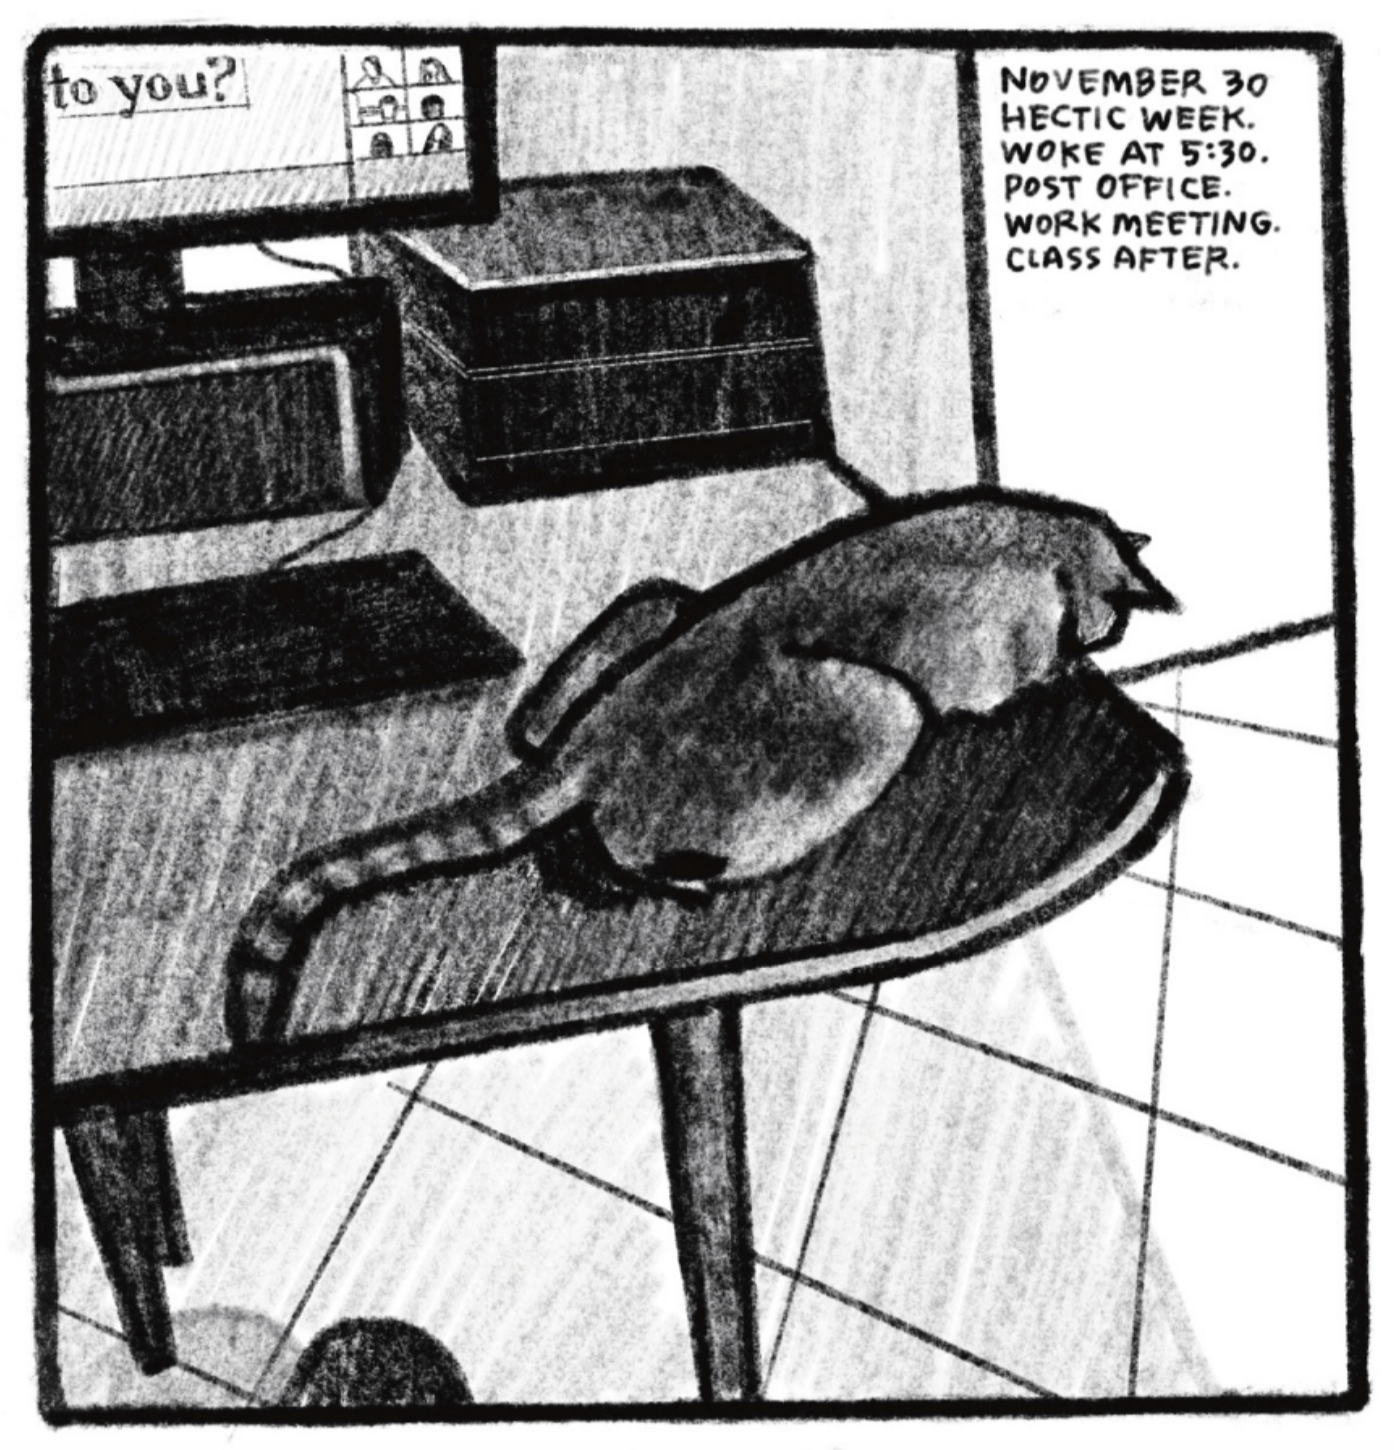 A cat lies on top of a work desk, head leaning over the edge and looking down at the floor. The computer monitor is mostly cut off, but shows a screen share presentation and a small grid of faces to the right, like in a Zoom meeting. â€œNovember 30. Hectic week. Woke at 5:30. Post office. Work meeting. Class after.â€